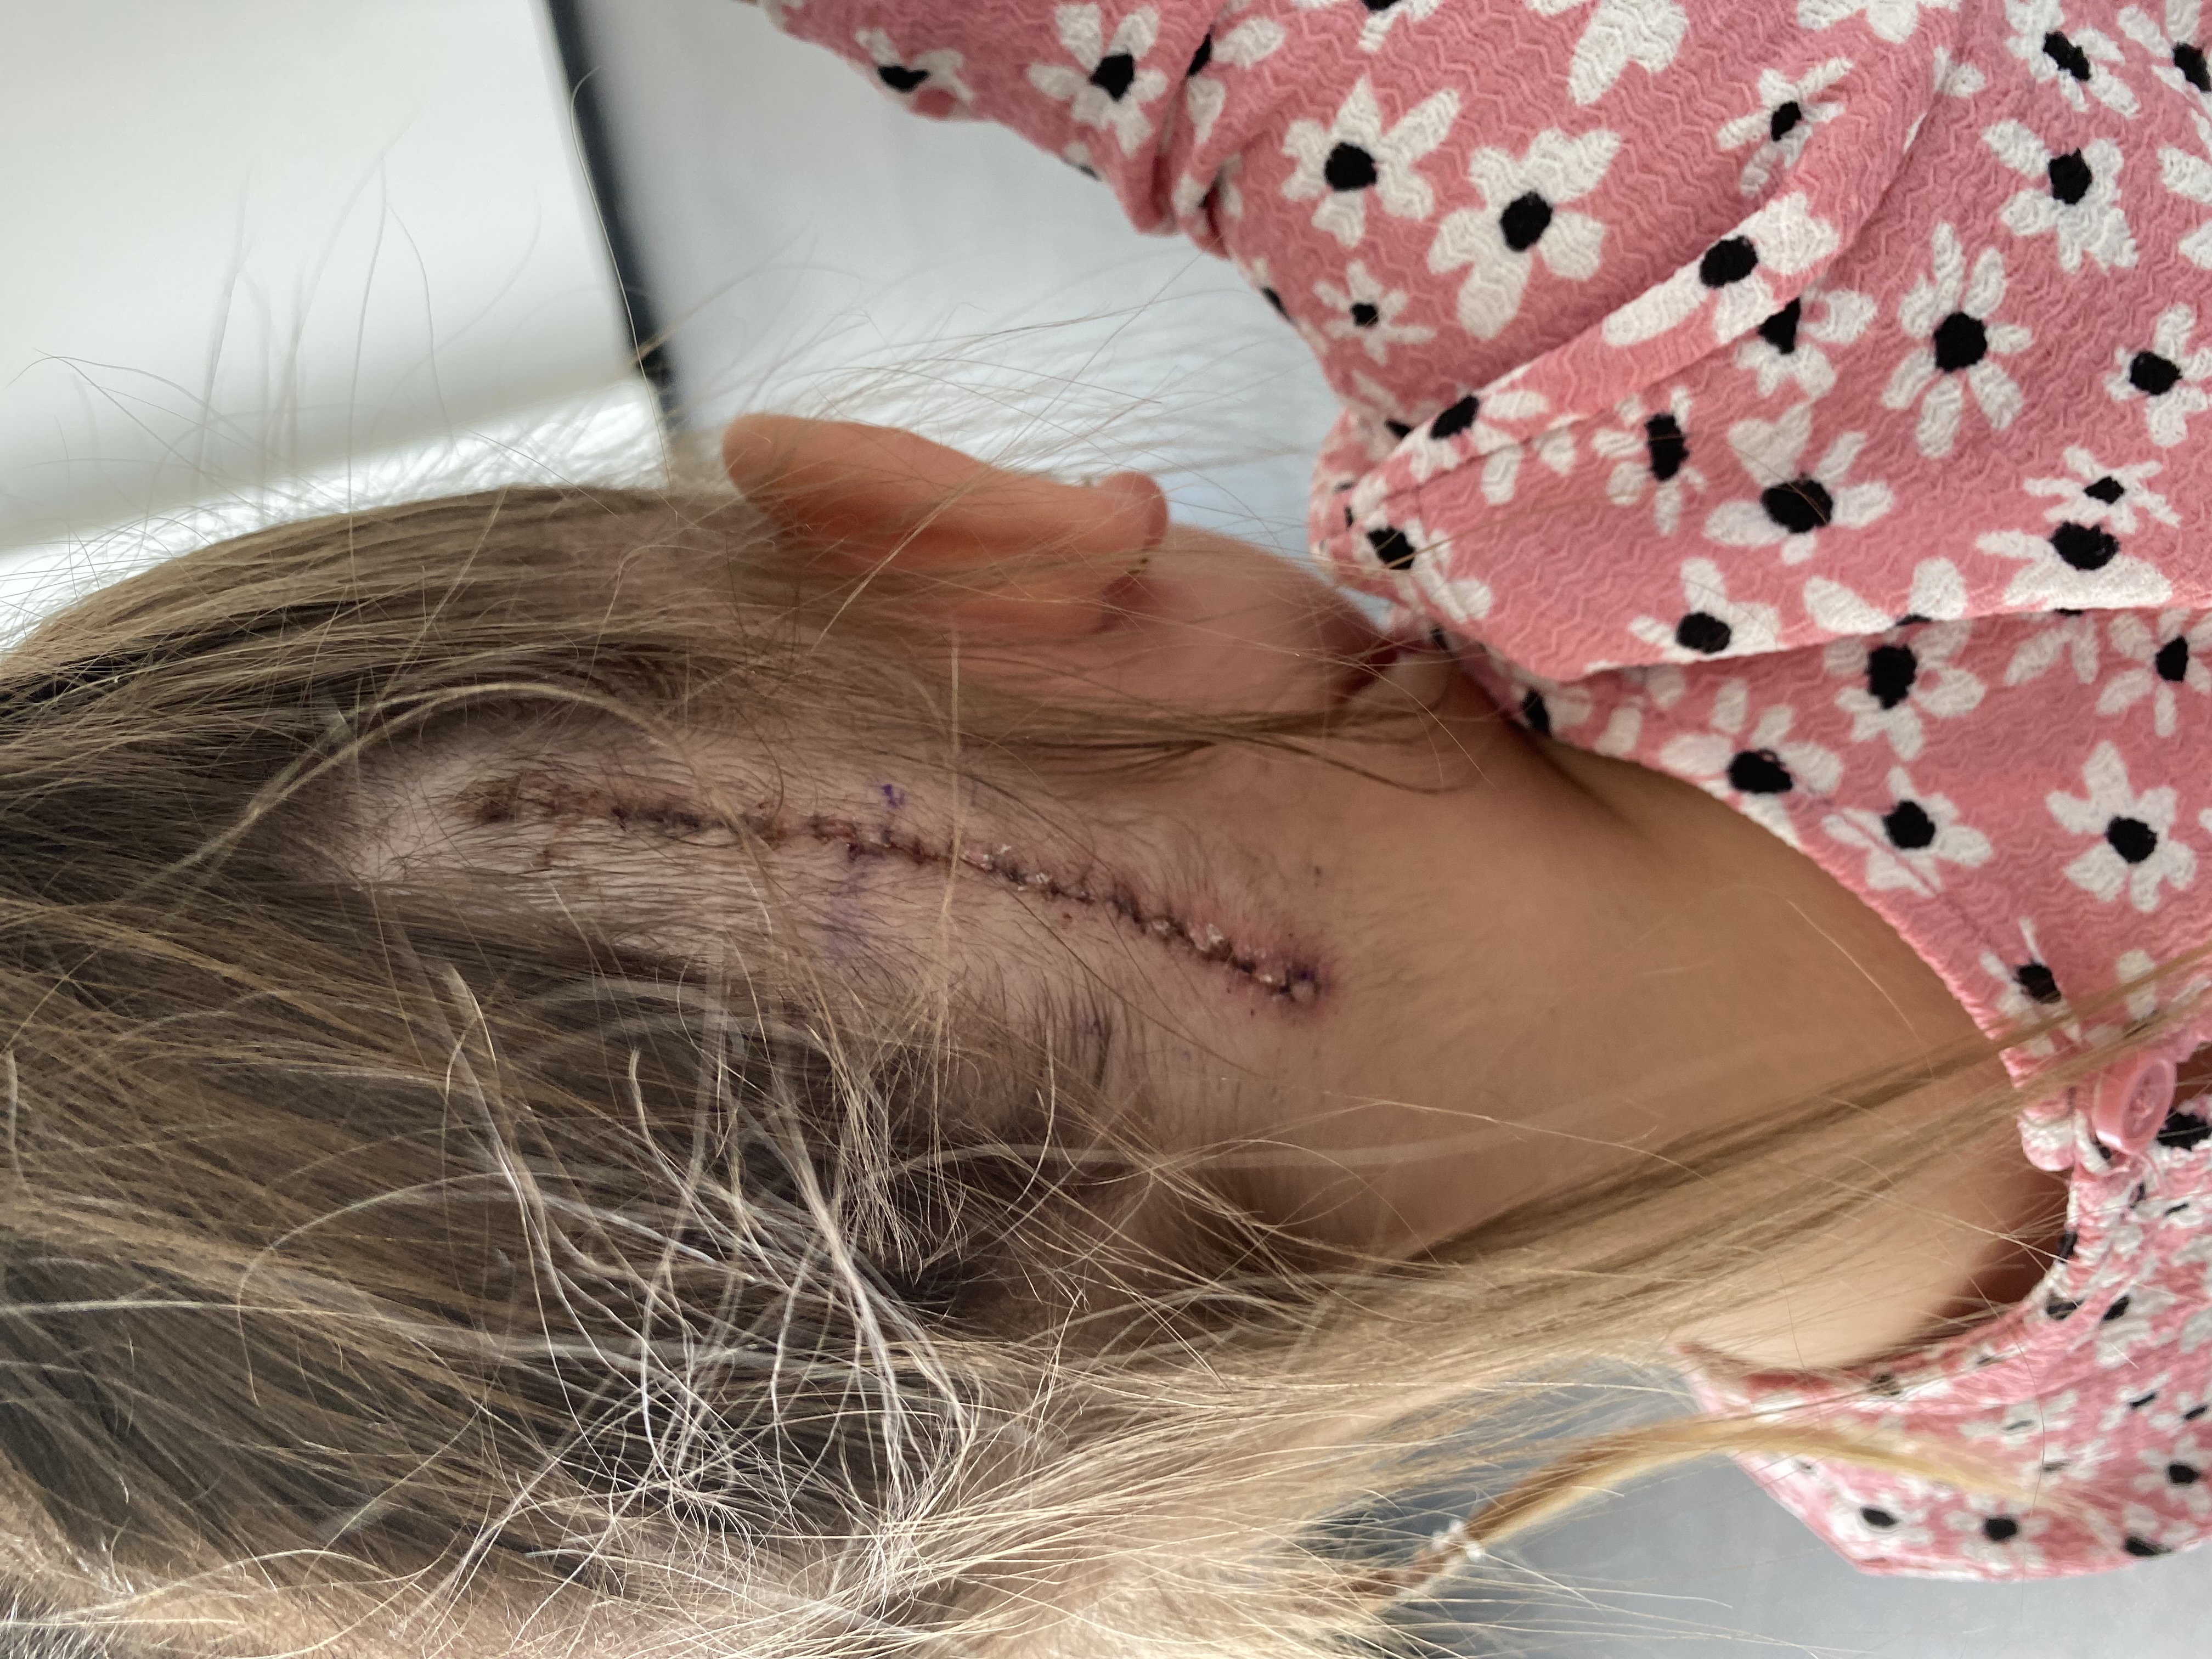 Sofia now has a five-inch scar at the back of her head (Collect/PA Real Life)